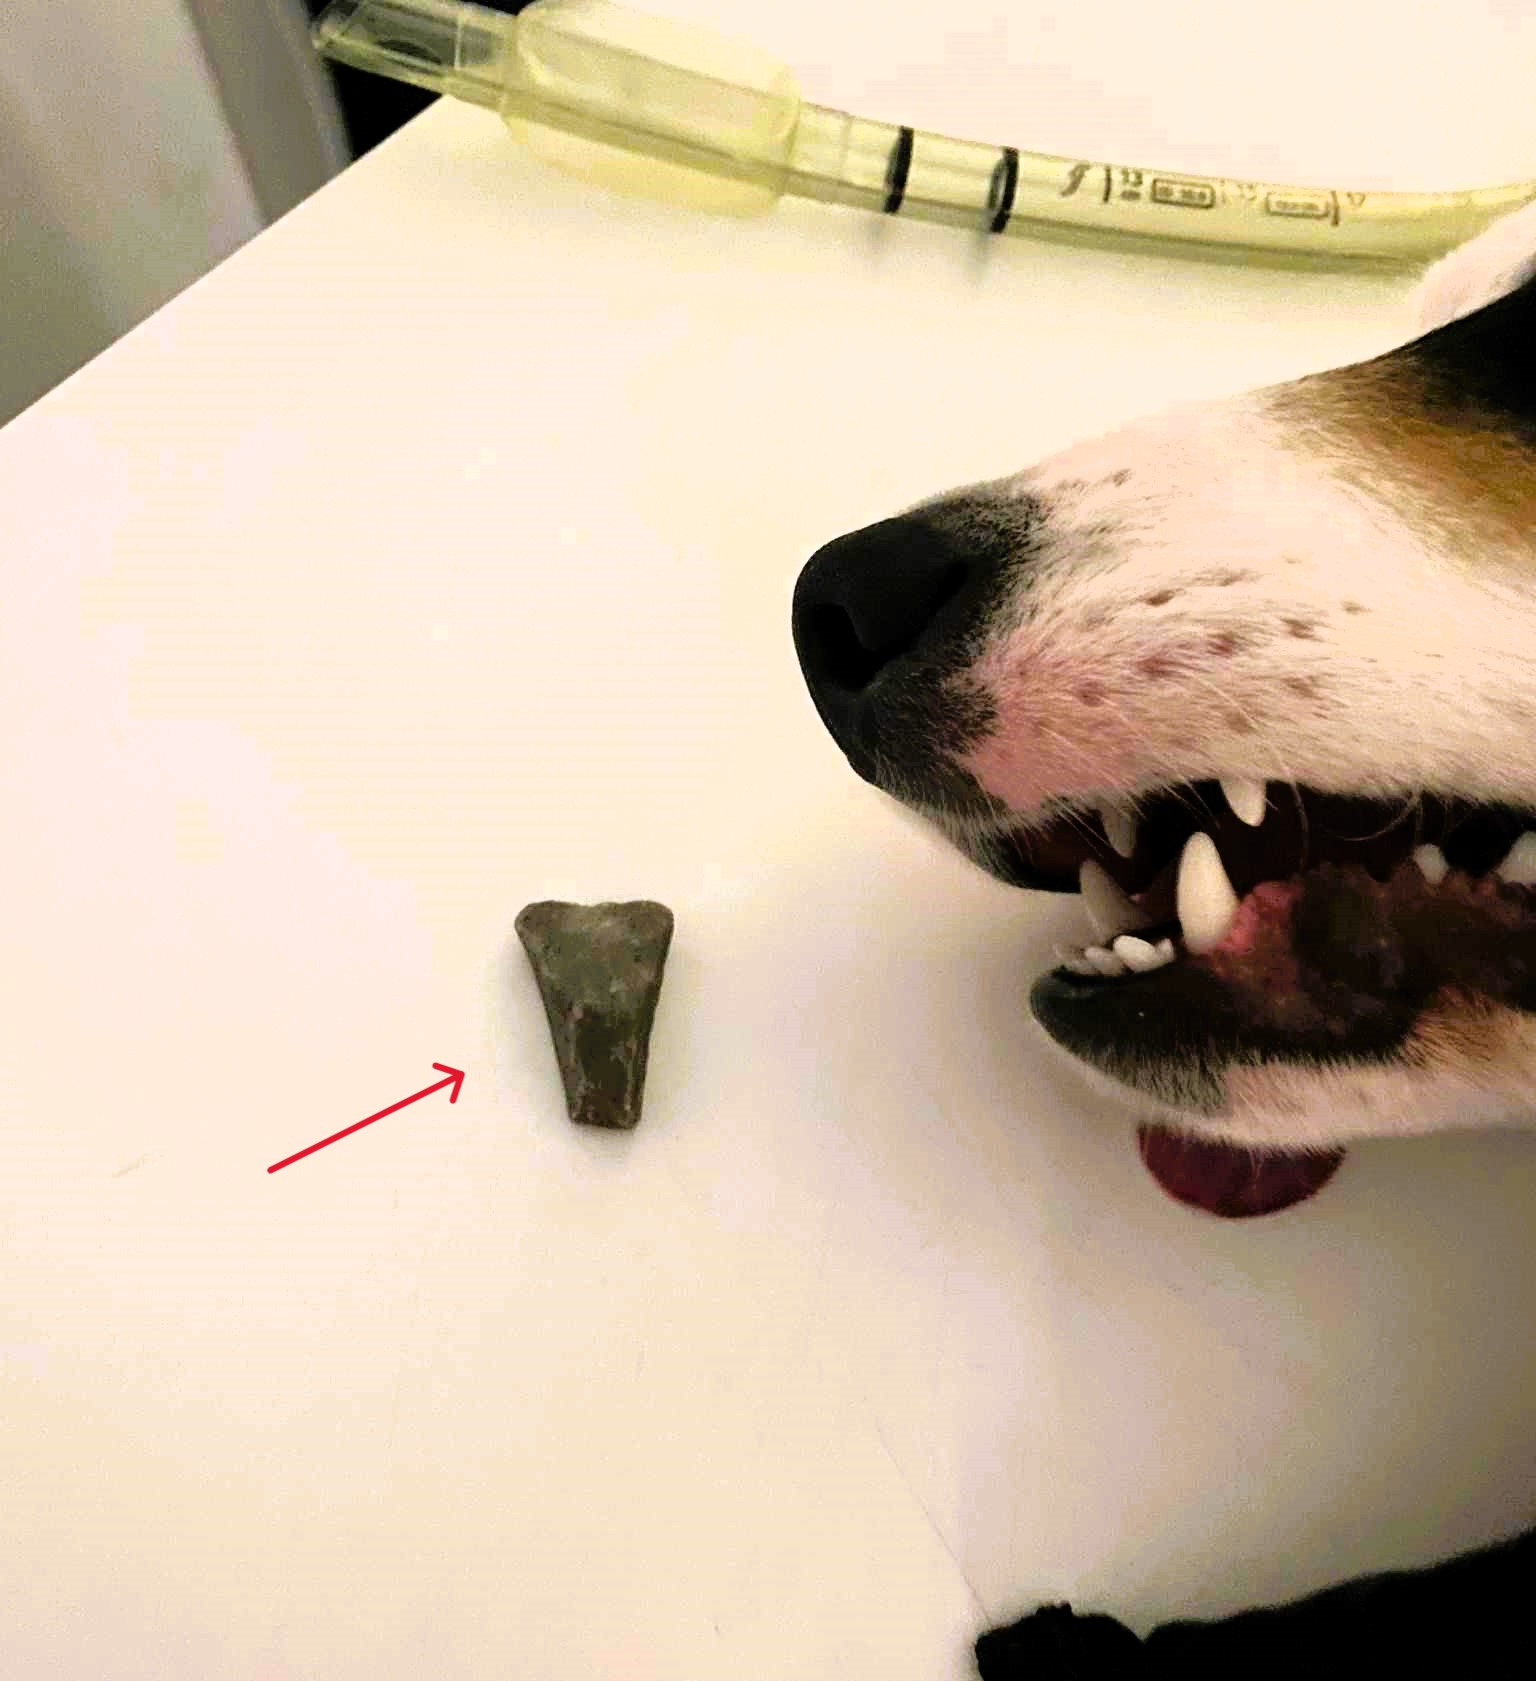 Quick-thinking owner saves choking dog by checking doorbell camera footage. Stone lodged in throat removed by vet, dog makes full recovery.